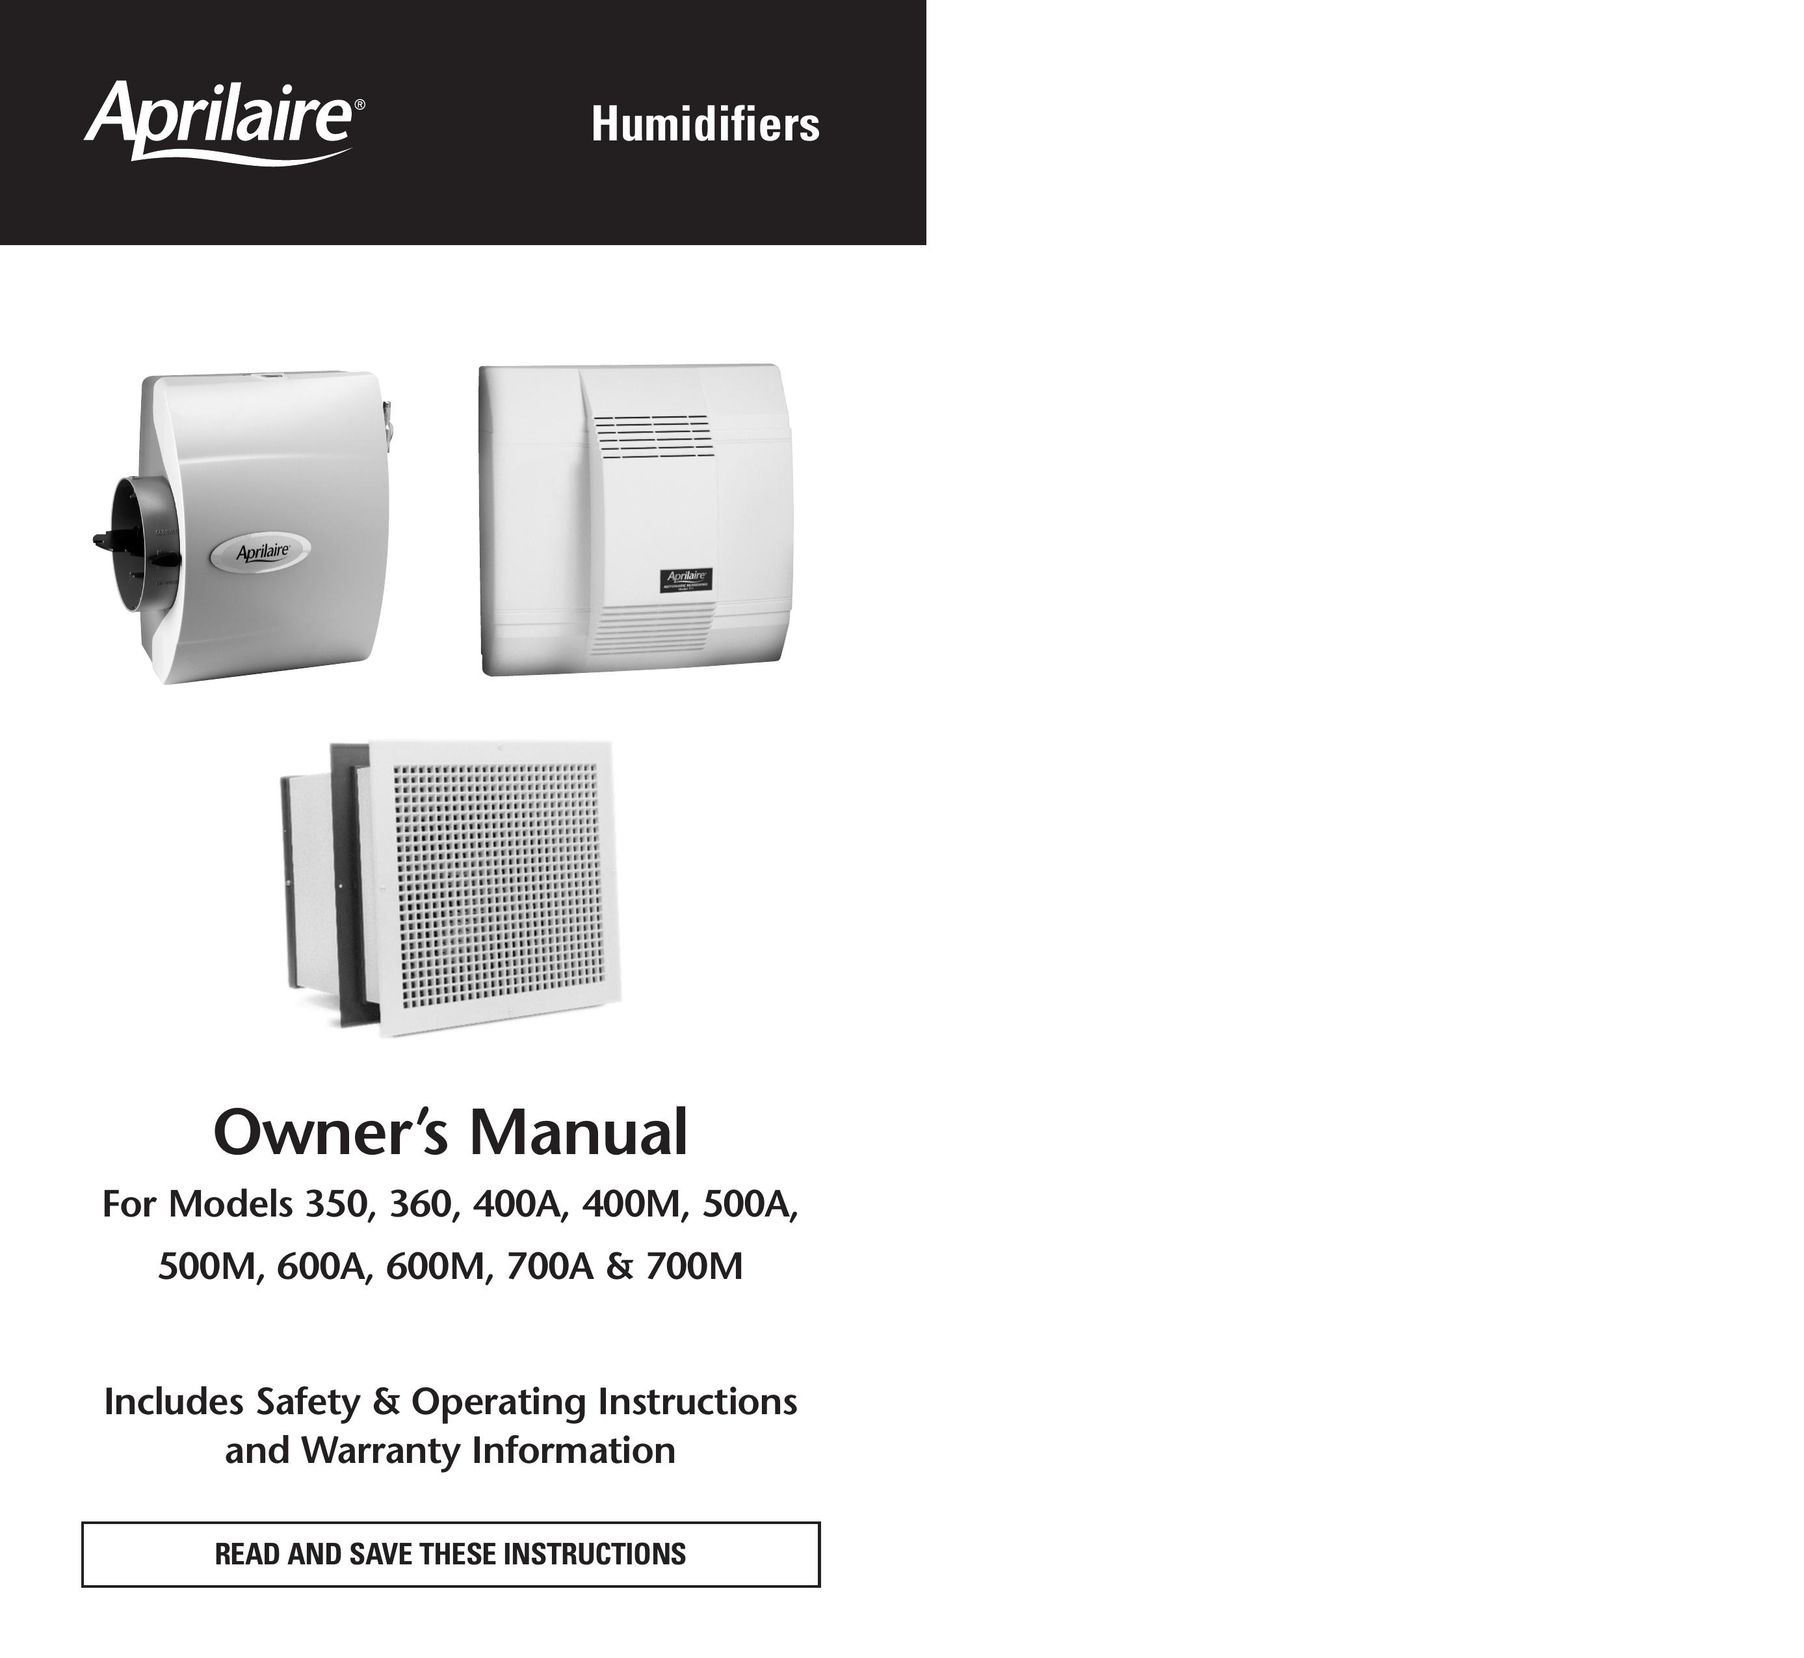 Aprilaire 600A Humidifier User Manual